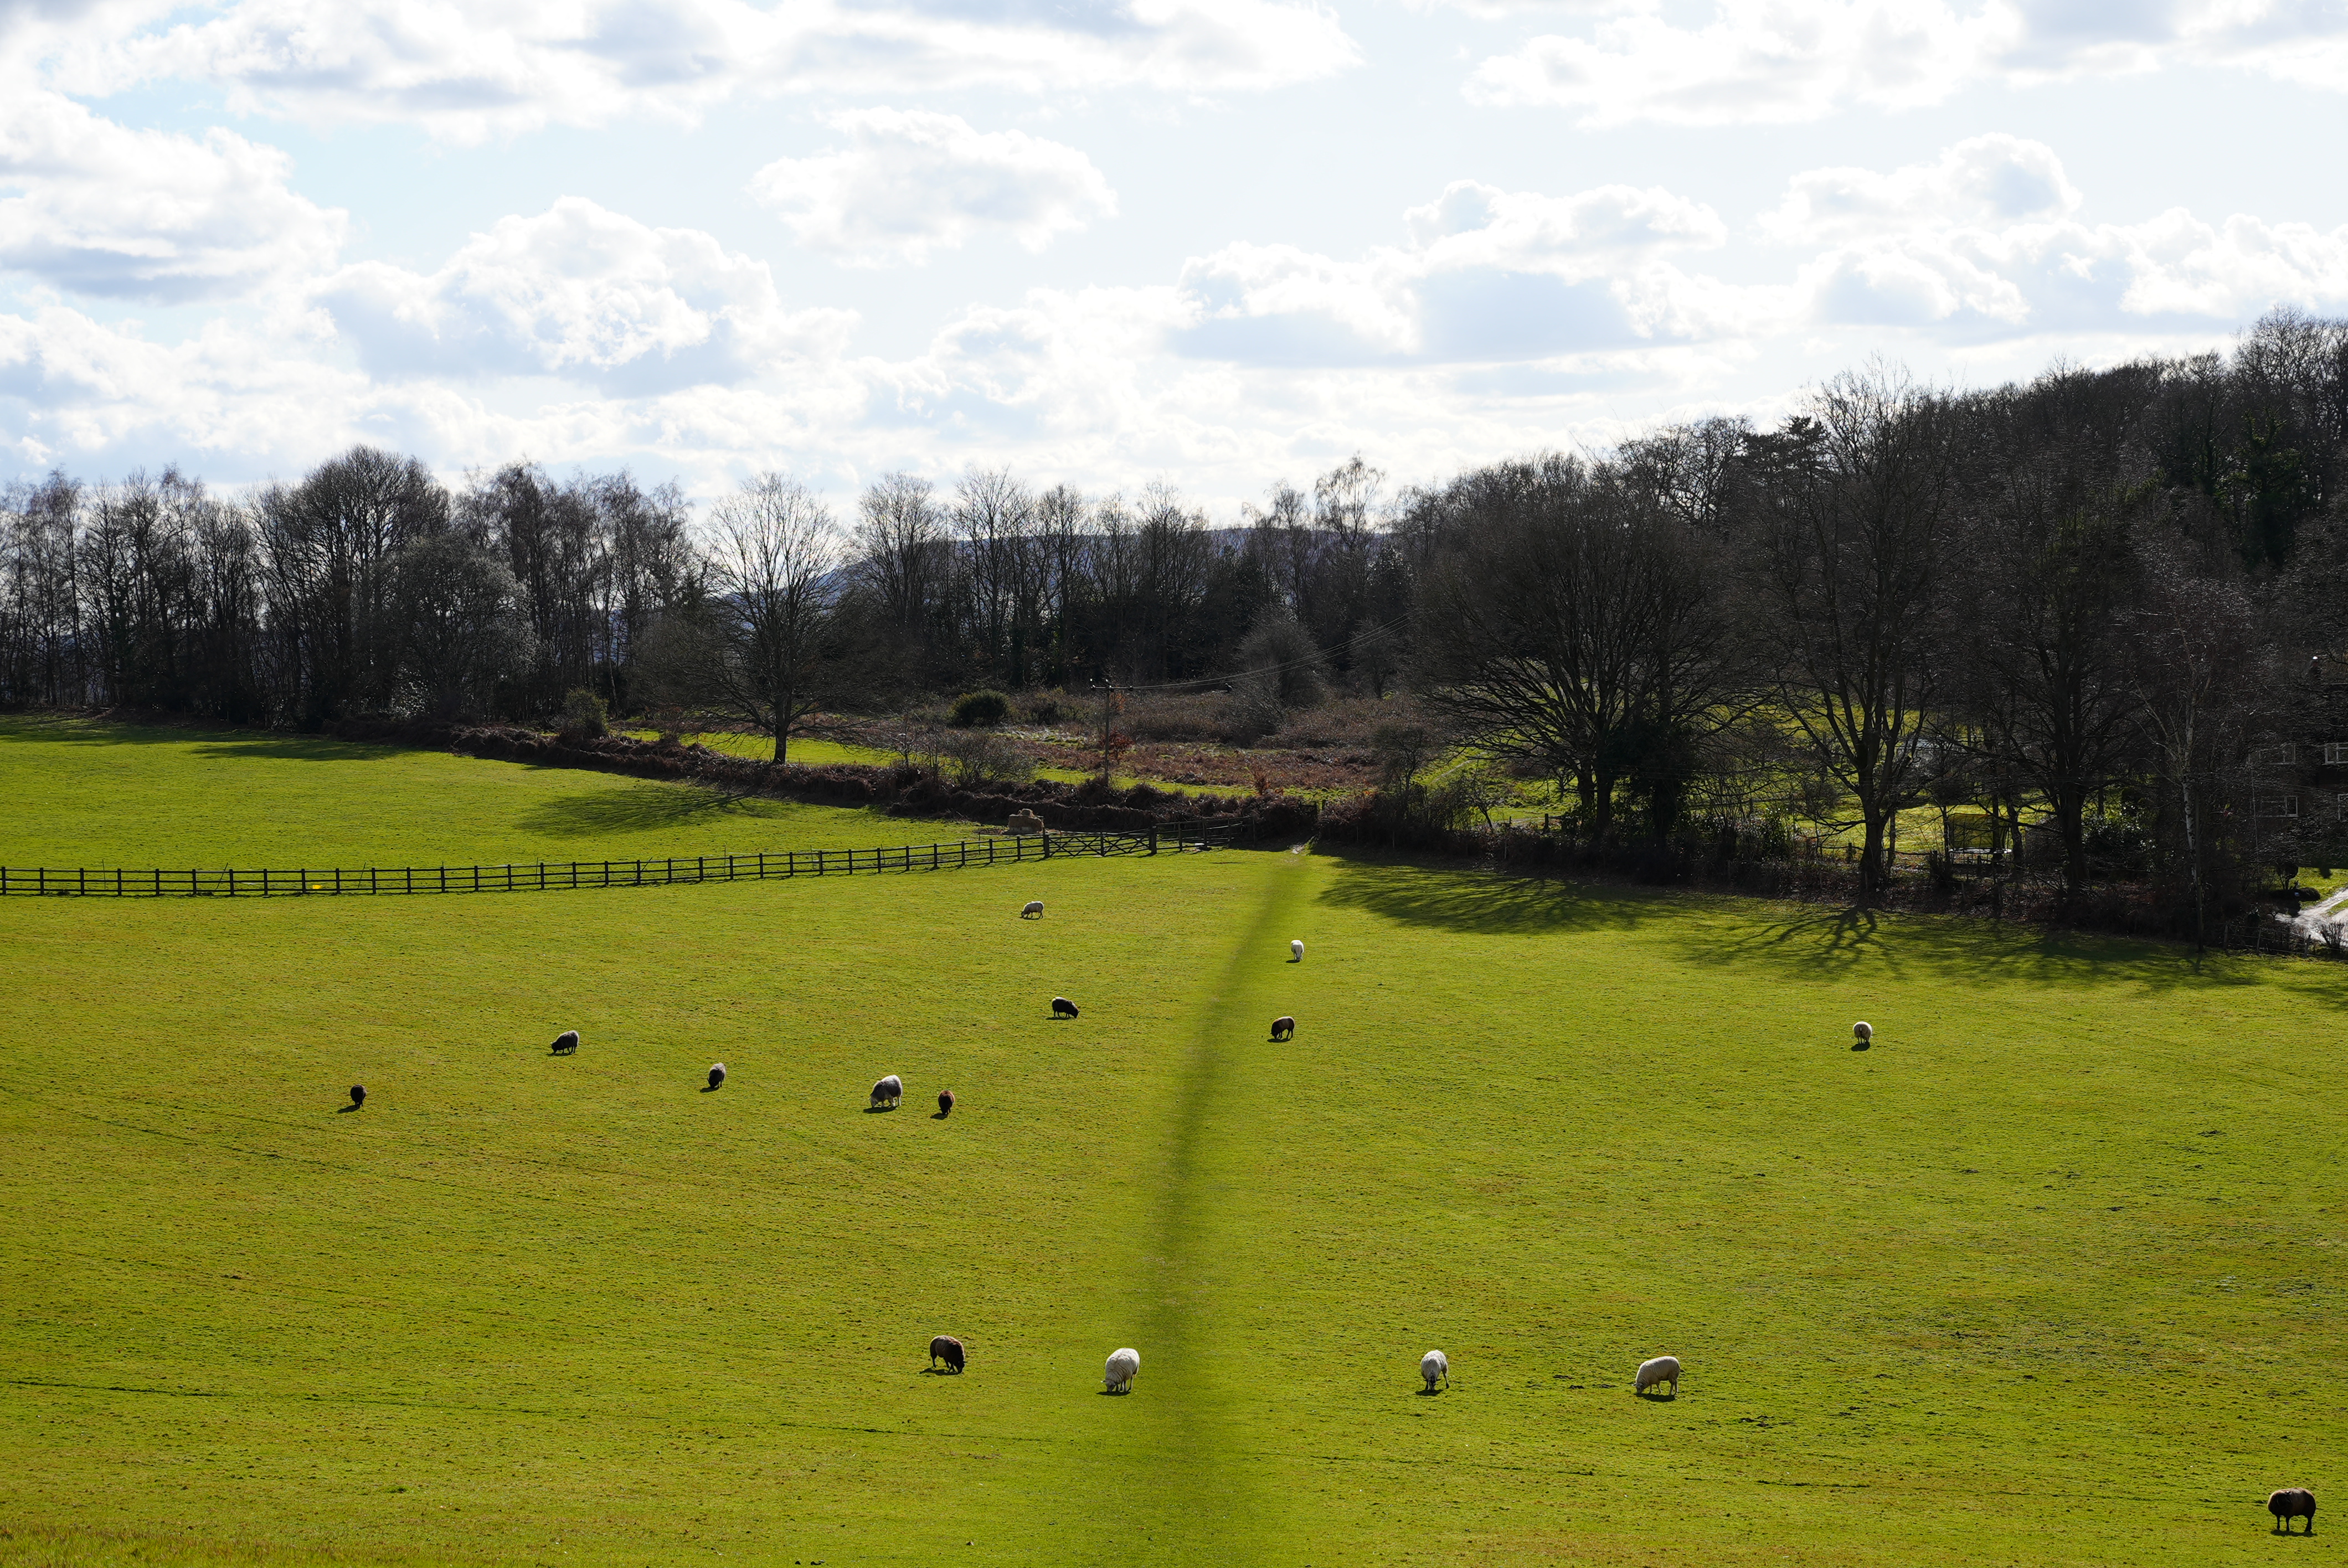 A green field in the sunshine